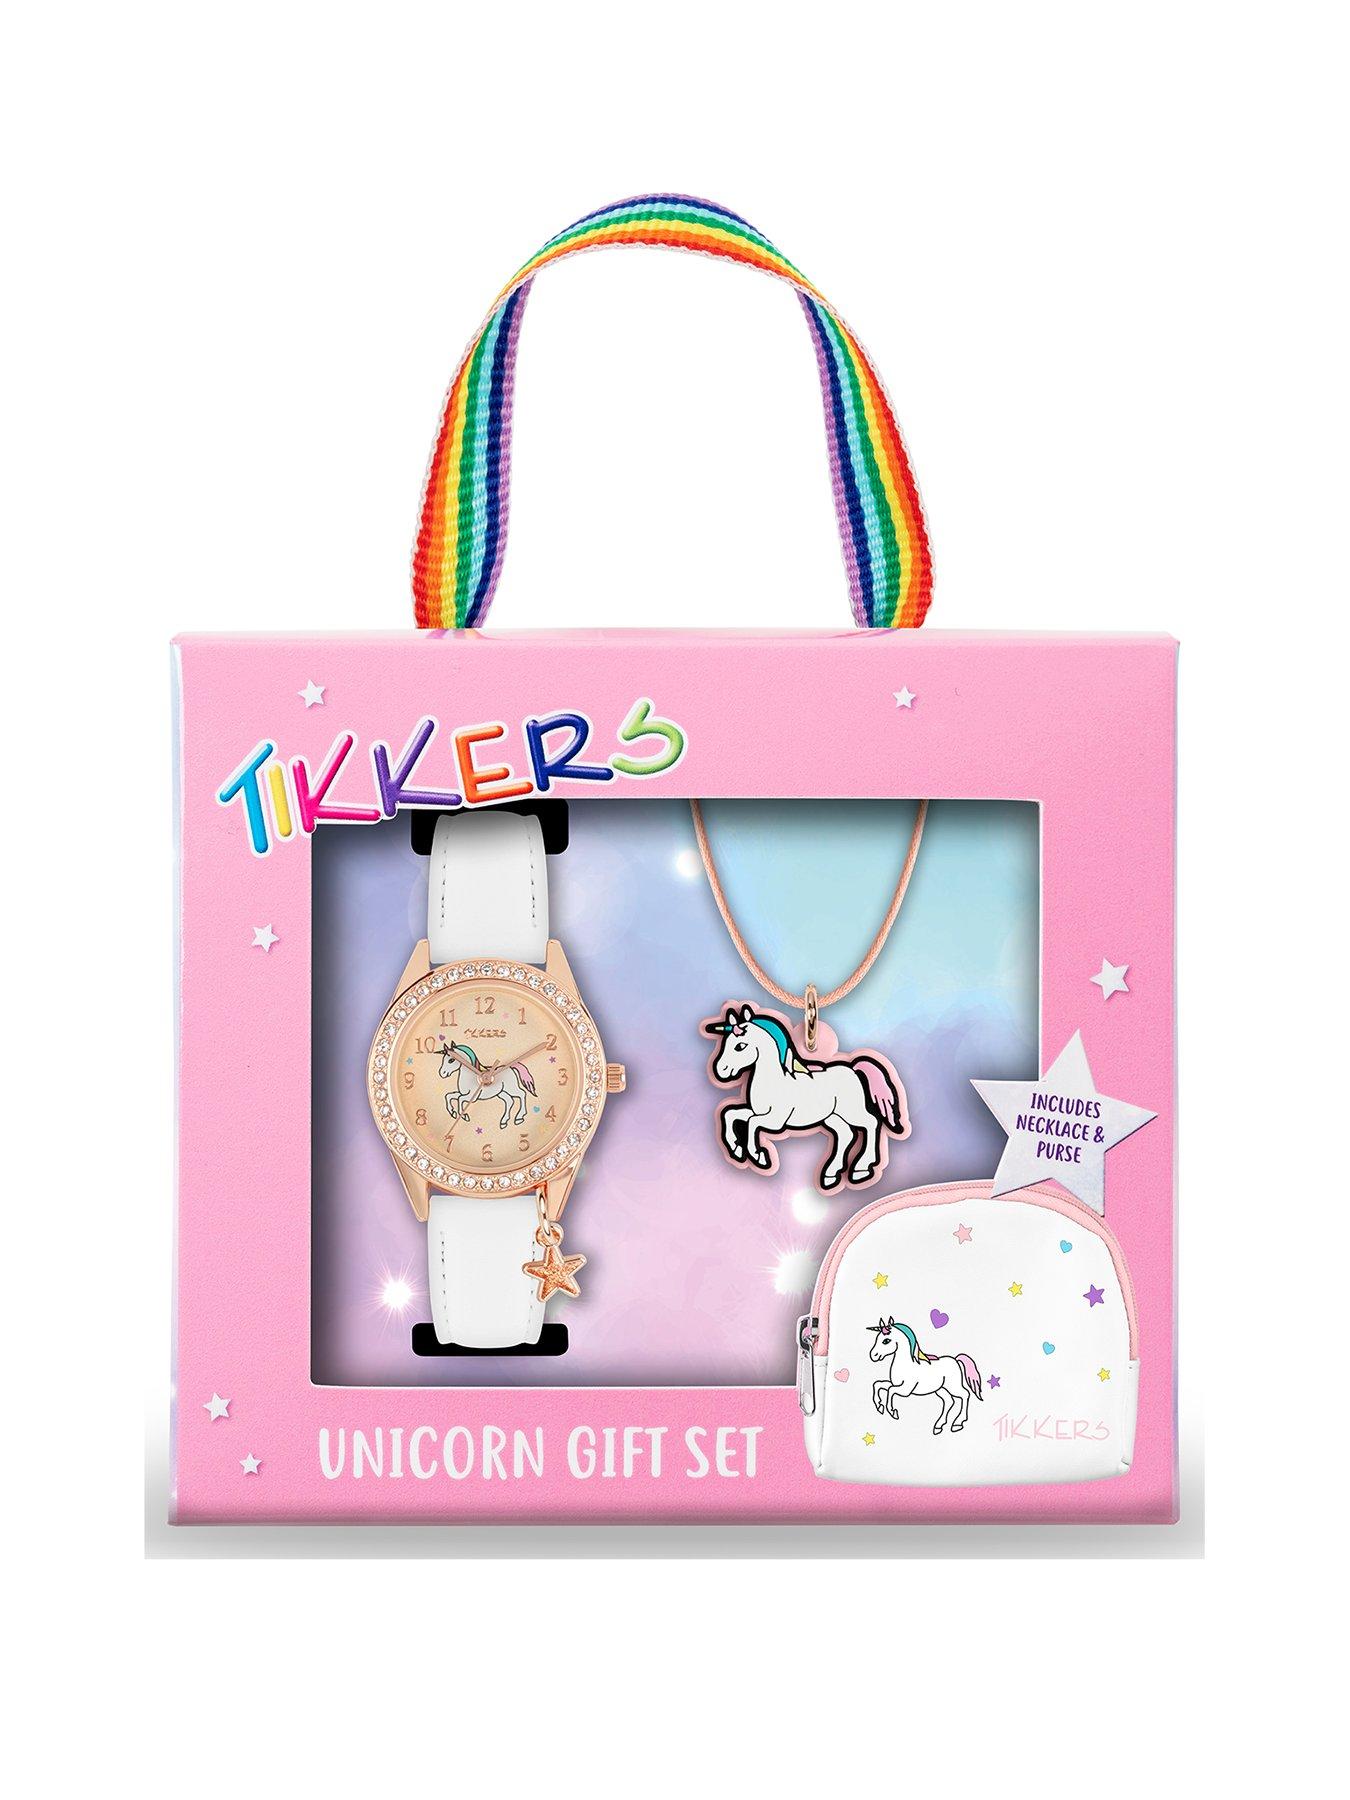  Gold Unicorn Dial White Leather Strap Watch with Purse and Necklace Kids Gift Set